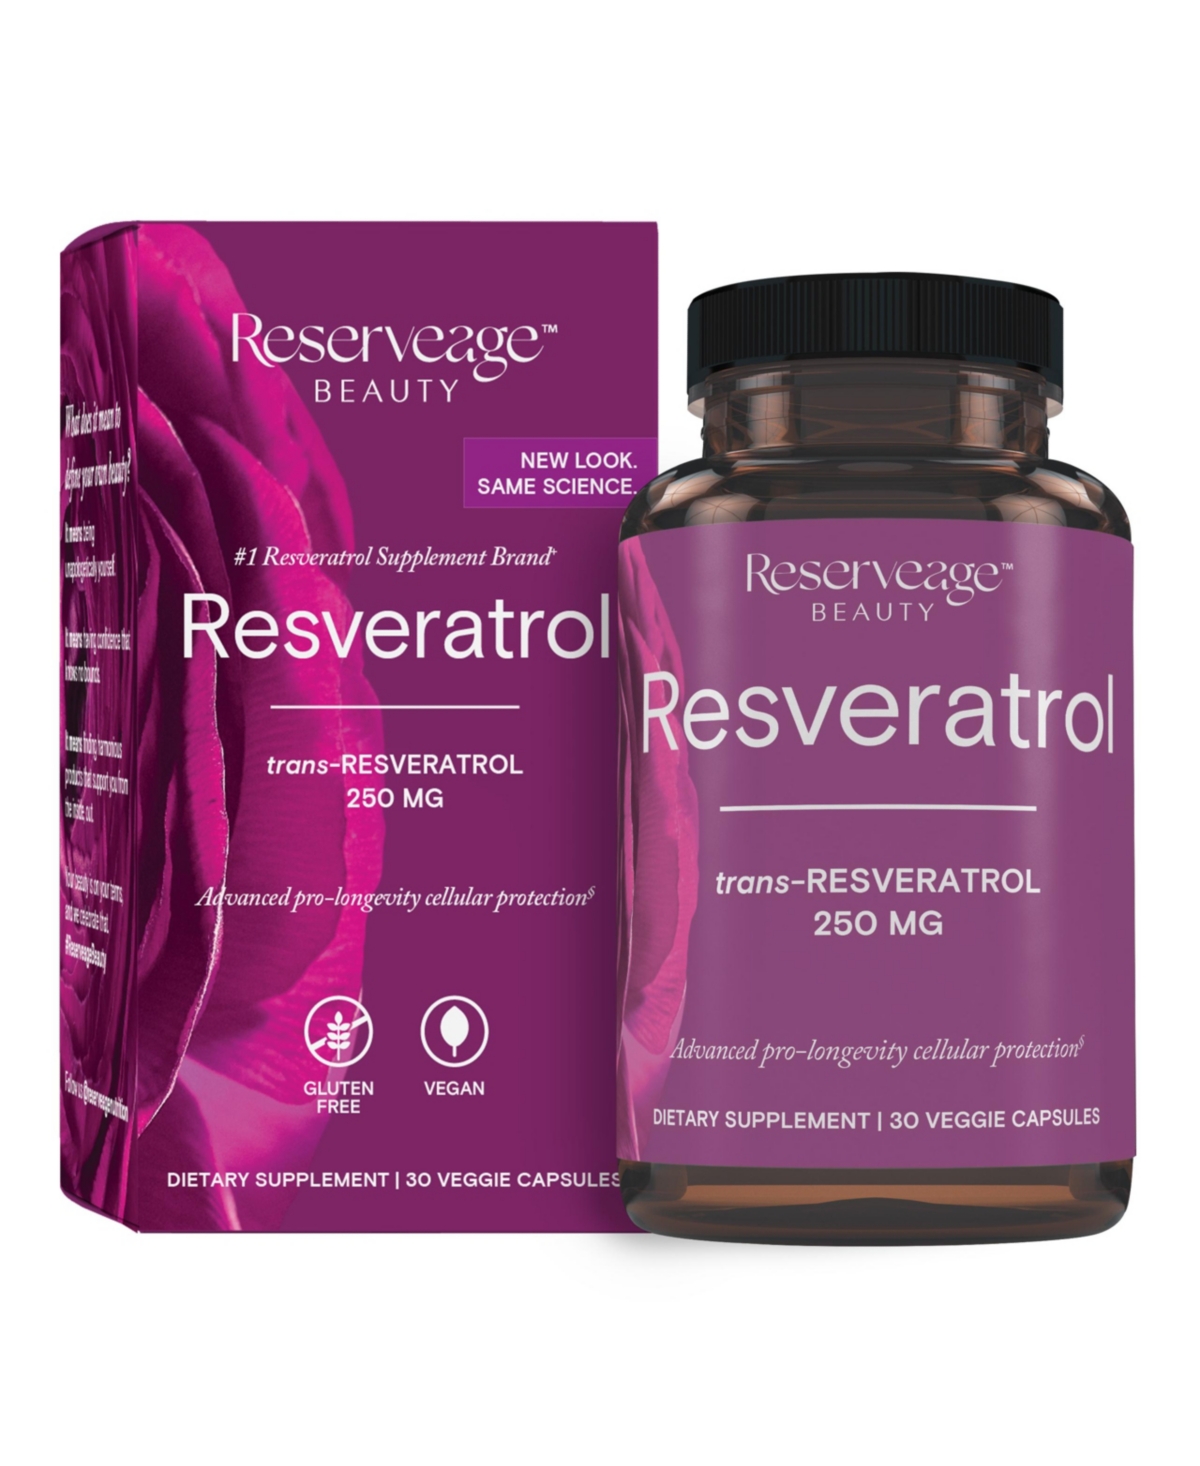 Resveratrol 250 mg, Antioxidant Supplement for Heart and Cellular Health, Supports Healthy Aging, Paleo, Keto, 30 Capsules